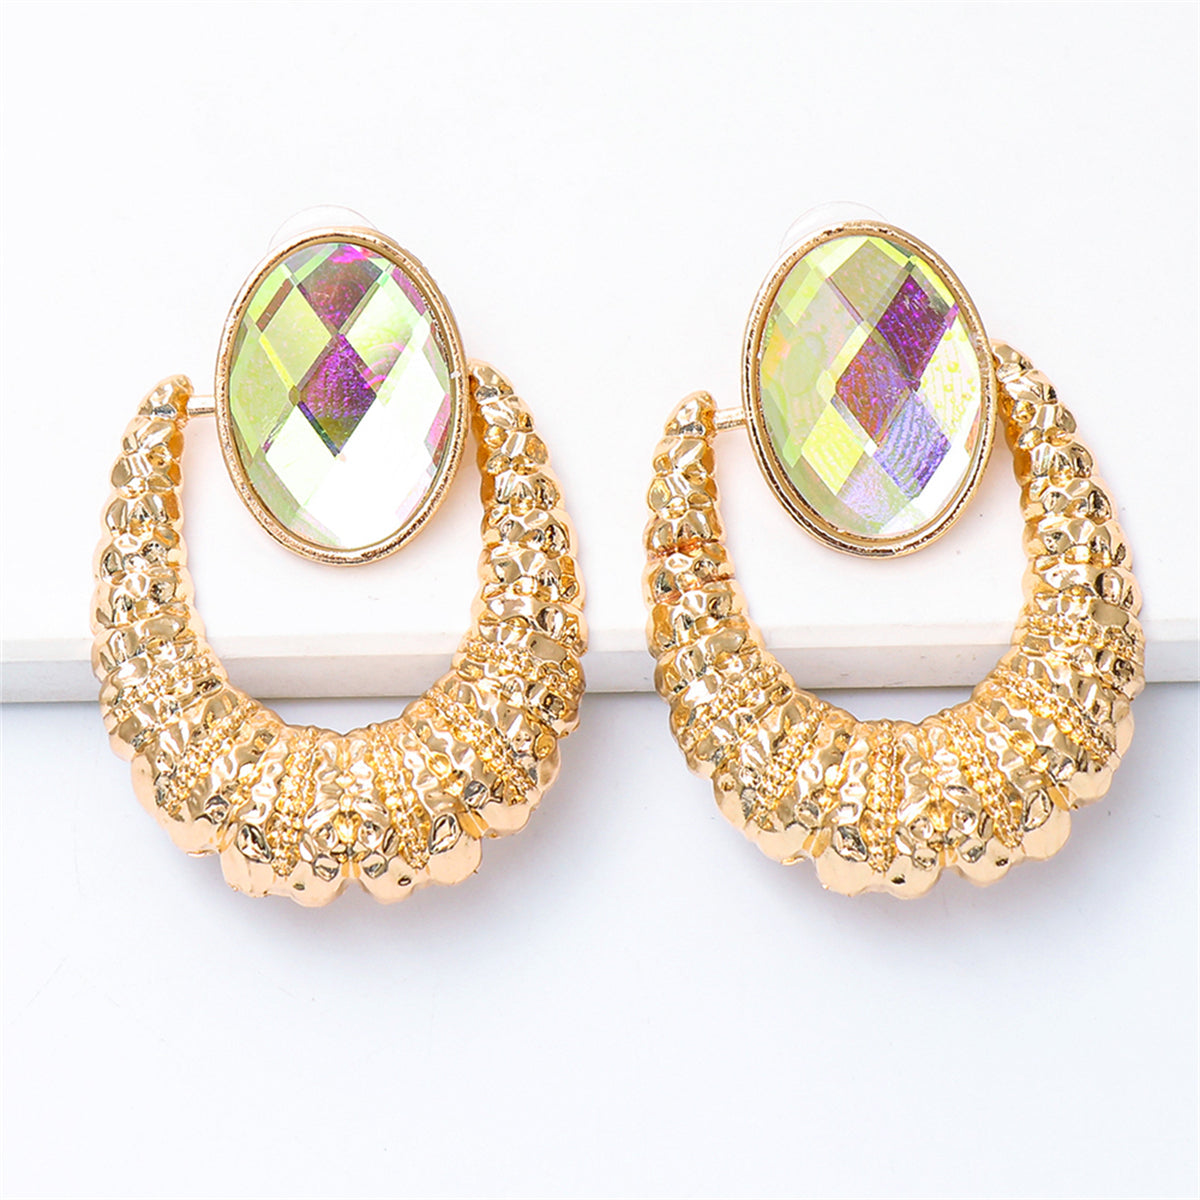 Light Green Oval Crystal & 18K Gold-Plated Catch Drop Earrings